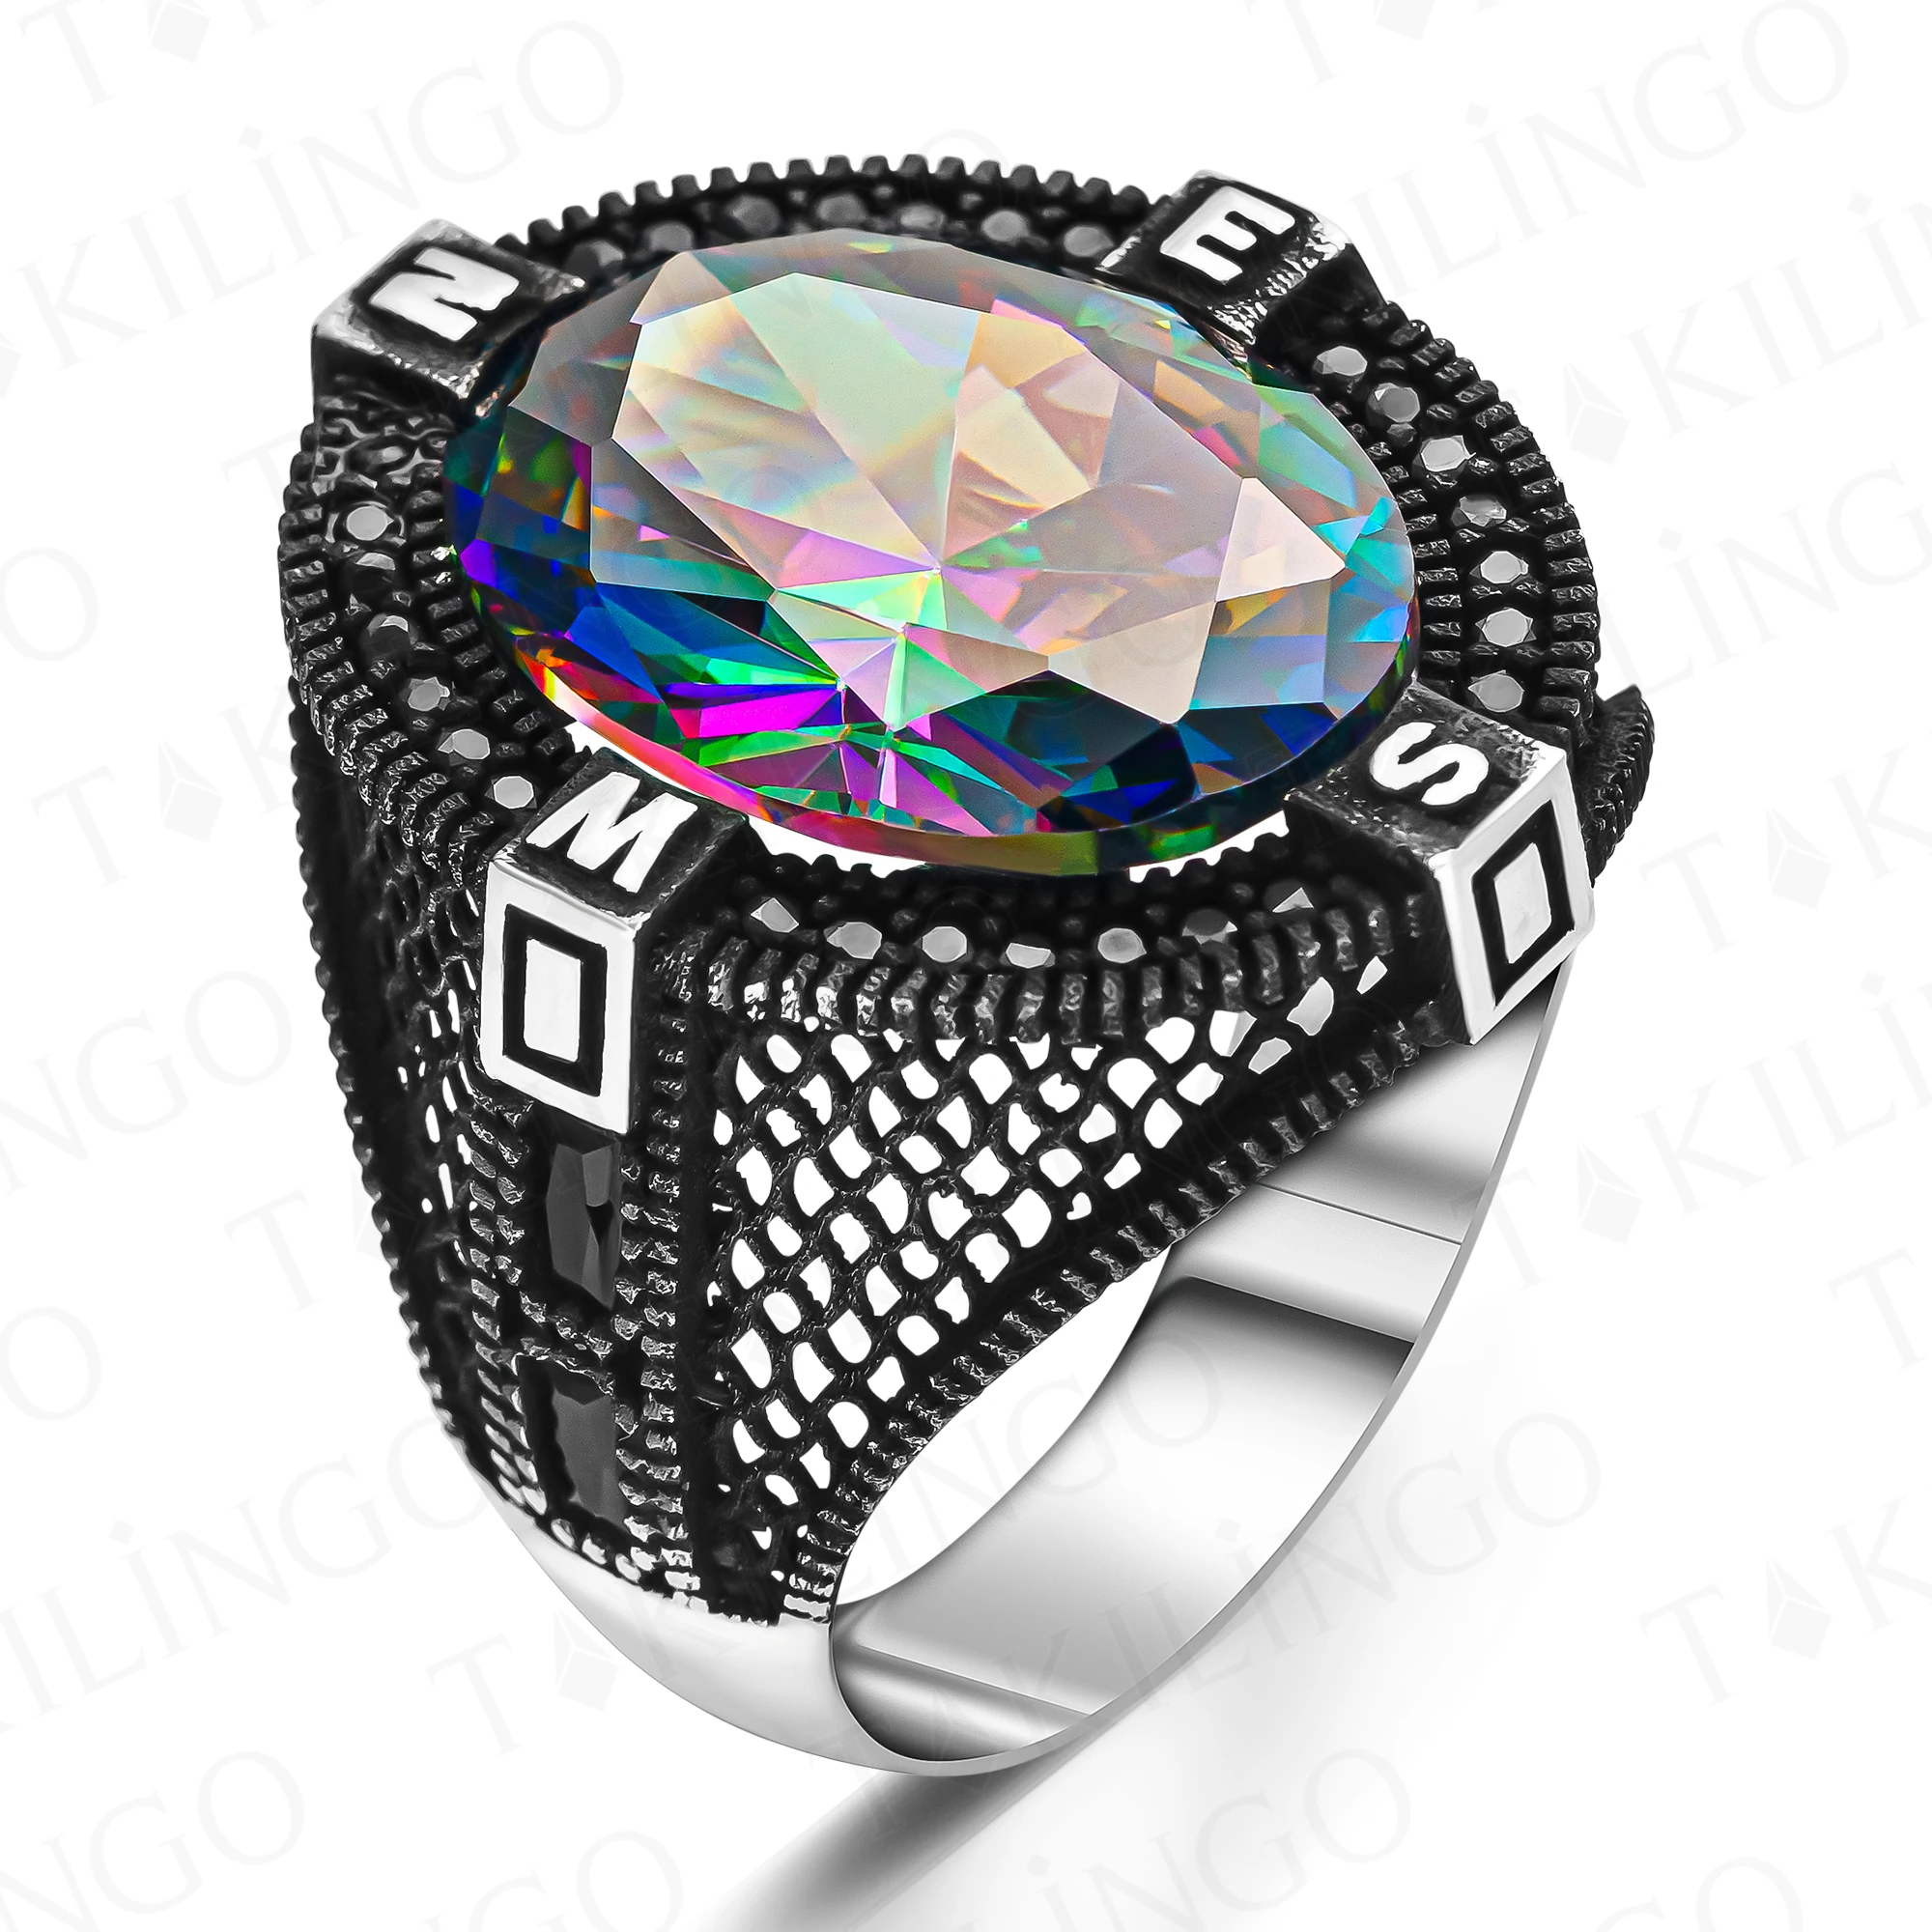 

Stamped Solid 925 Sterling Silver Compass Design Oval Mystic Topaz Men's Ring Handmade Sailor Silver Jewelry Gift For Men